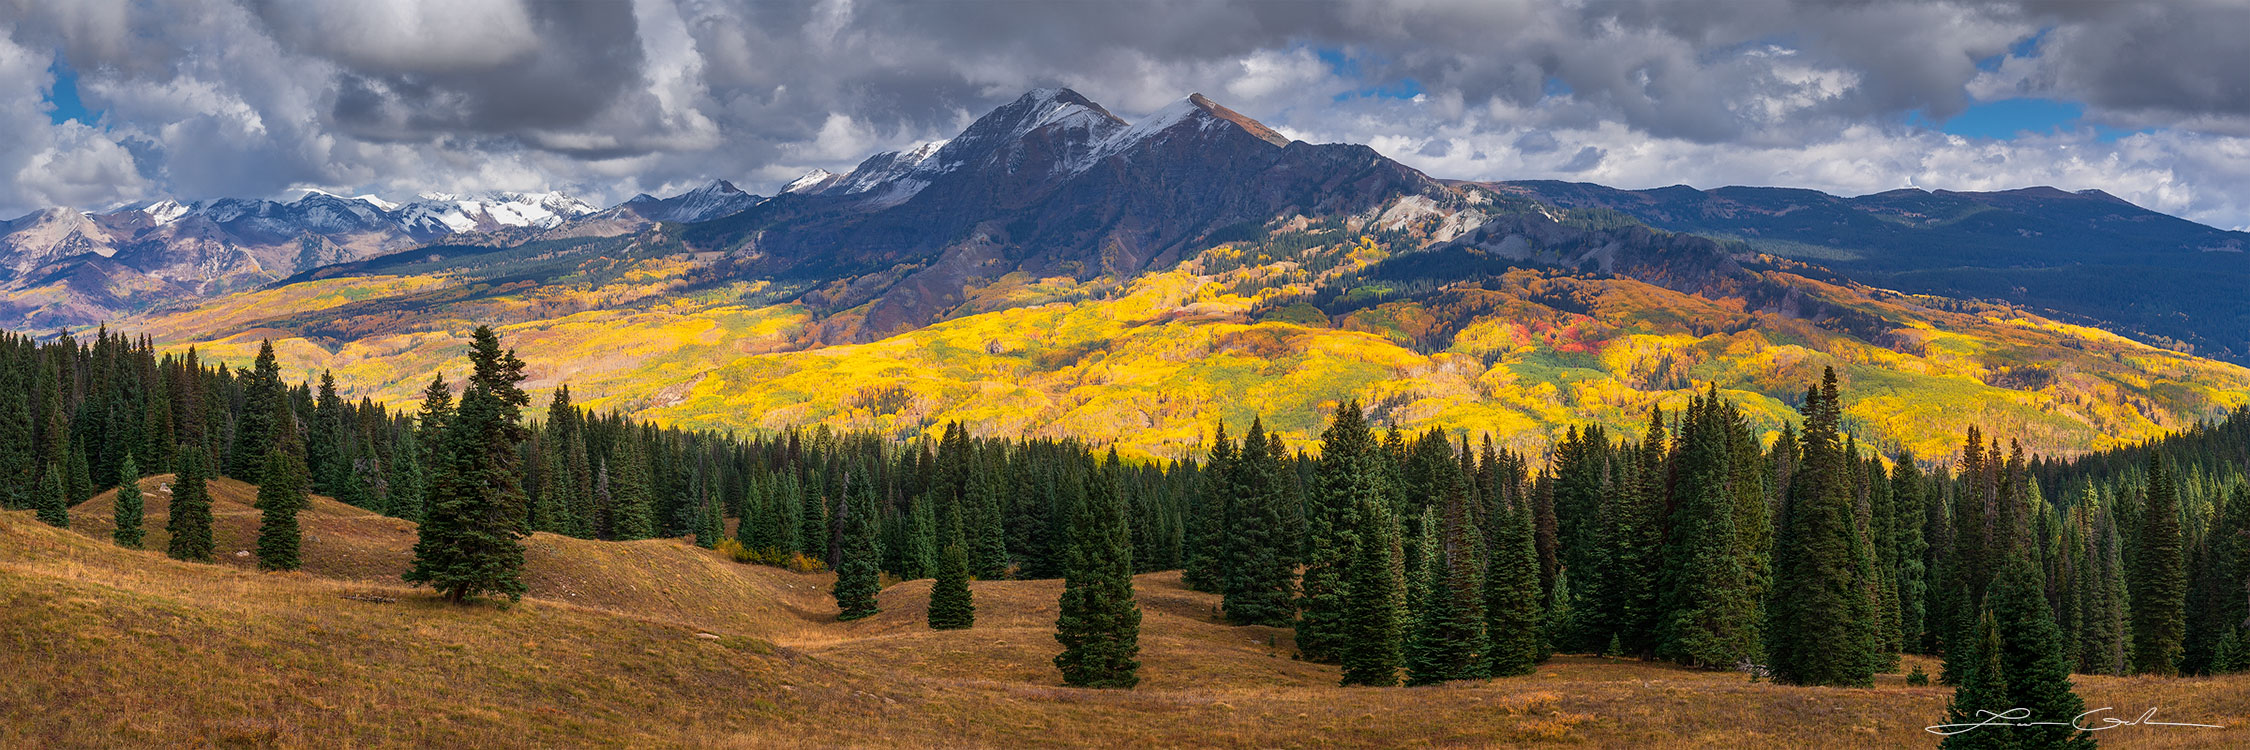 Rich fall colors mountain panorama with evergreen and aspen trees - Gintchin Fine Art